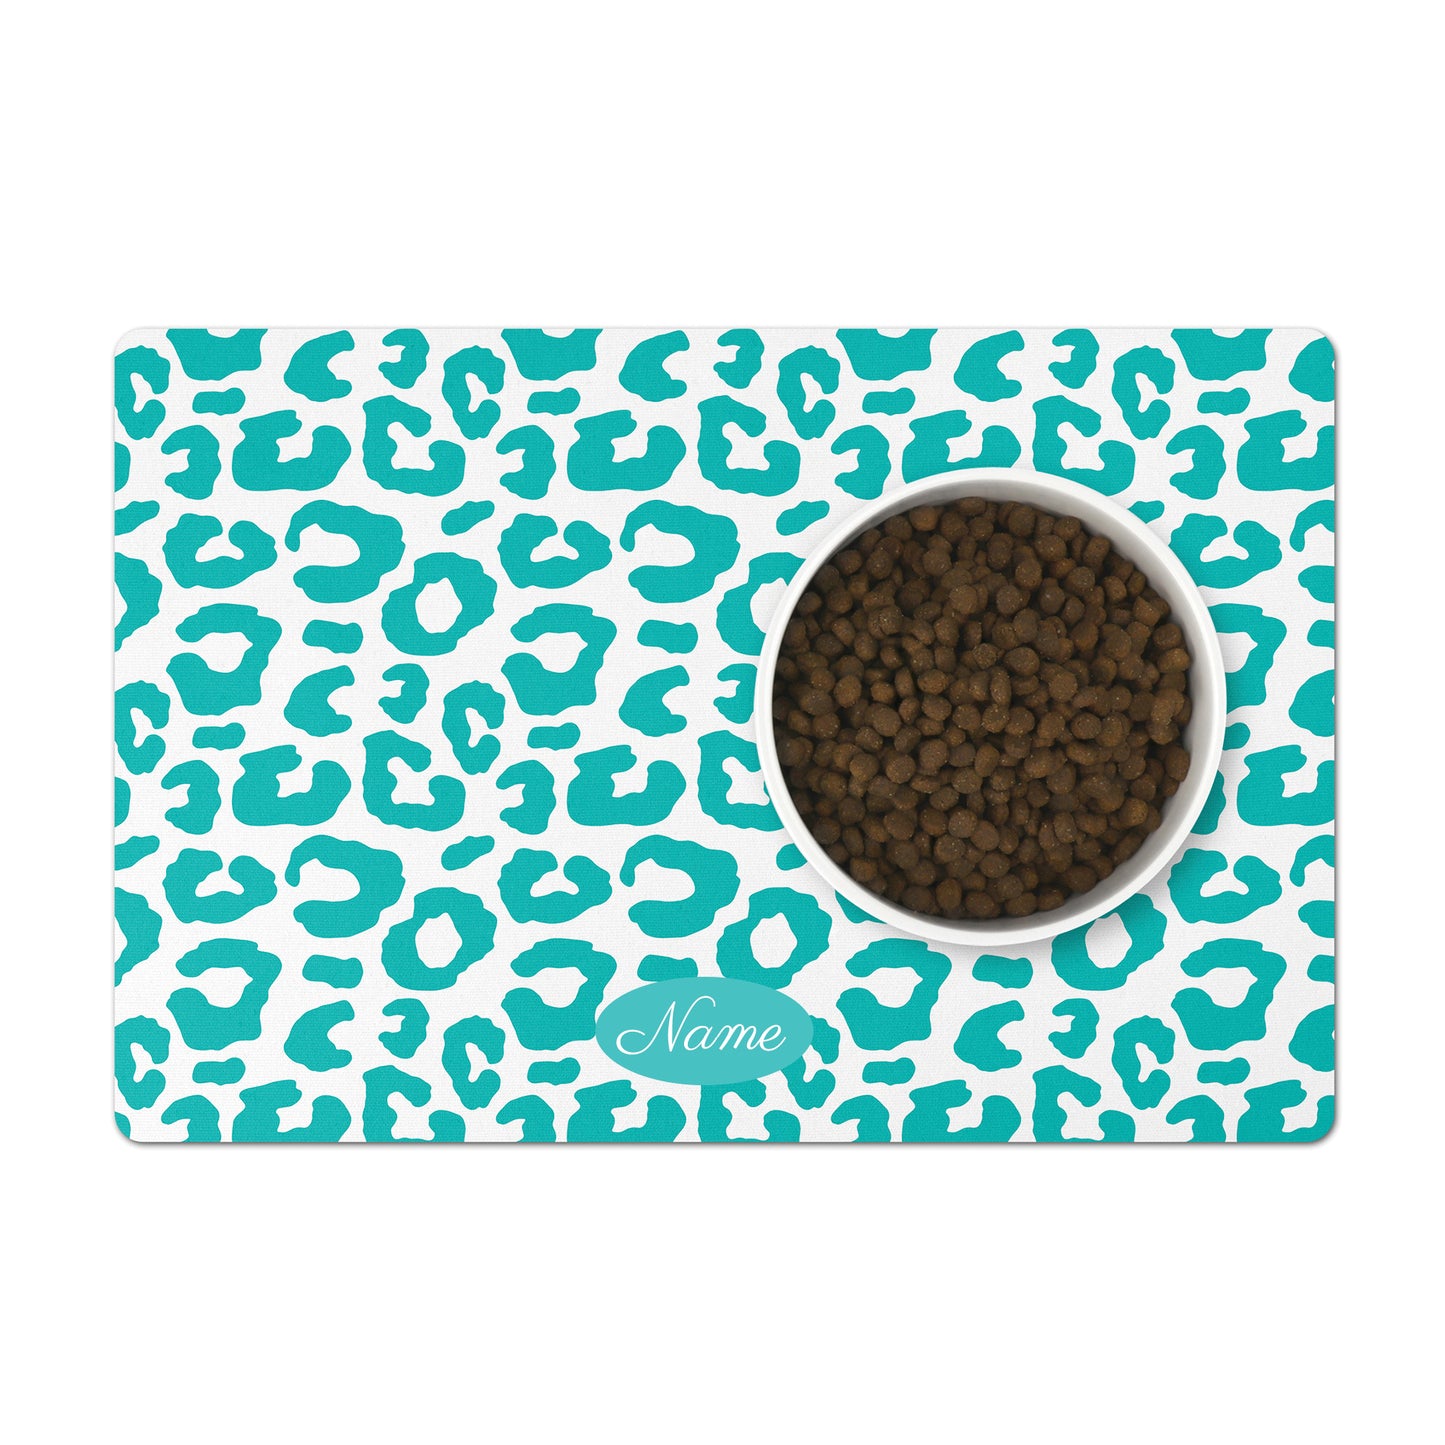 Personalized pet gift idea, a custom pet feeding mat and floor protector. Gorgeous chic blue and white leopard pattern pet placemat.